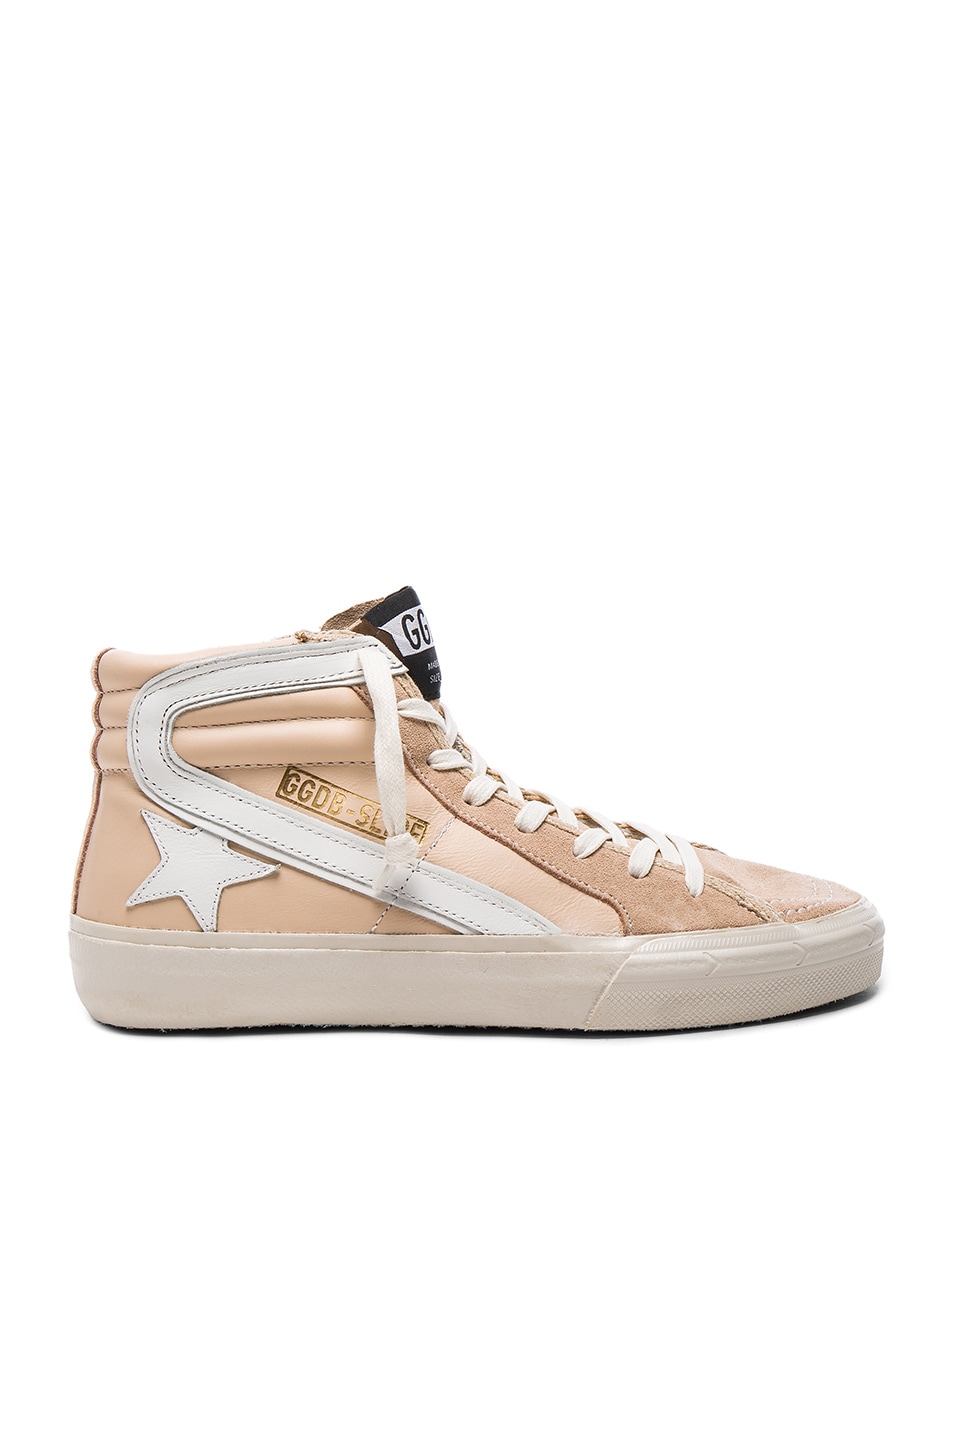 Image 1 of Golden Goose Leather Slide Sneakers in Nude